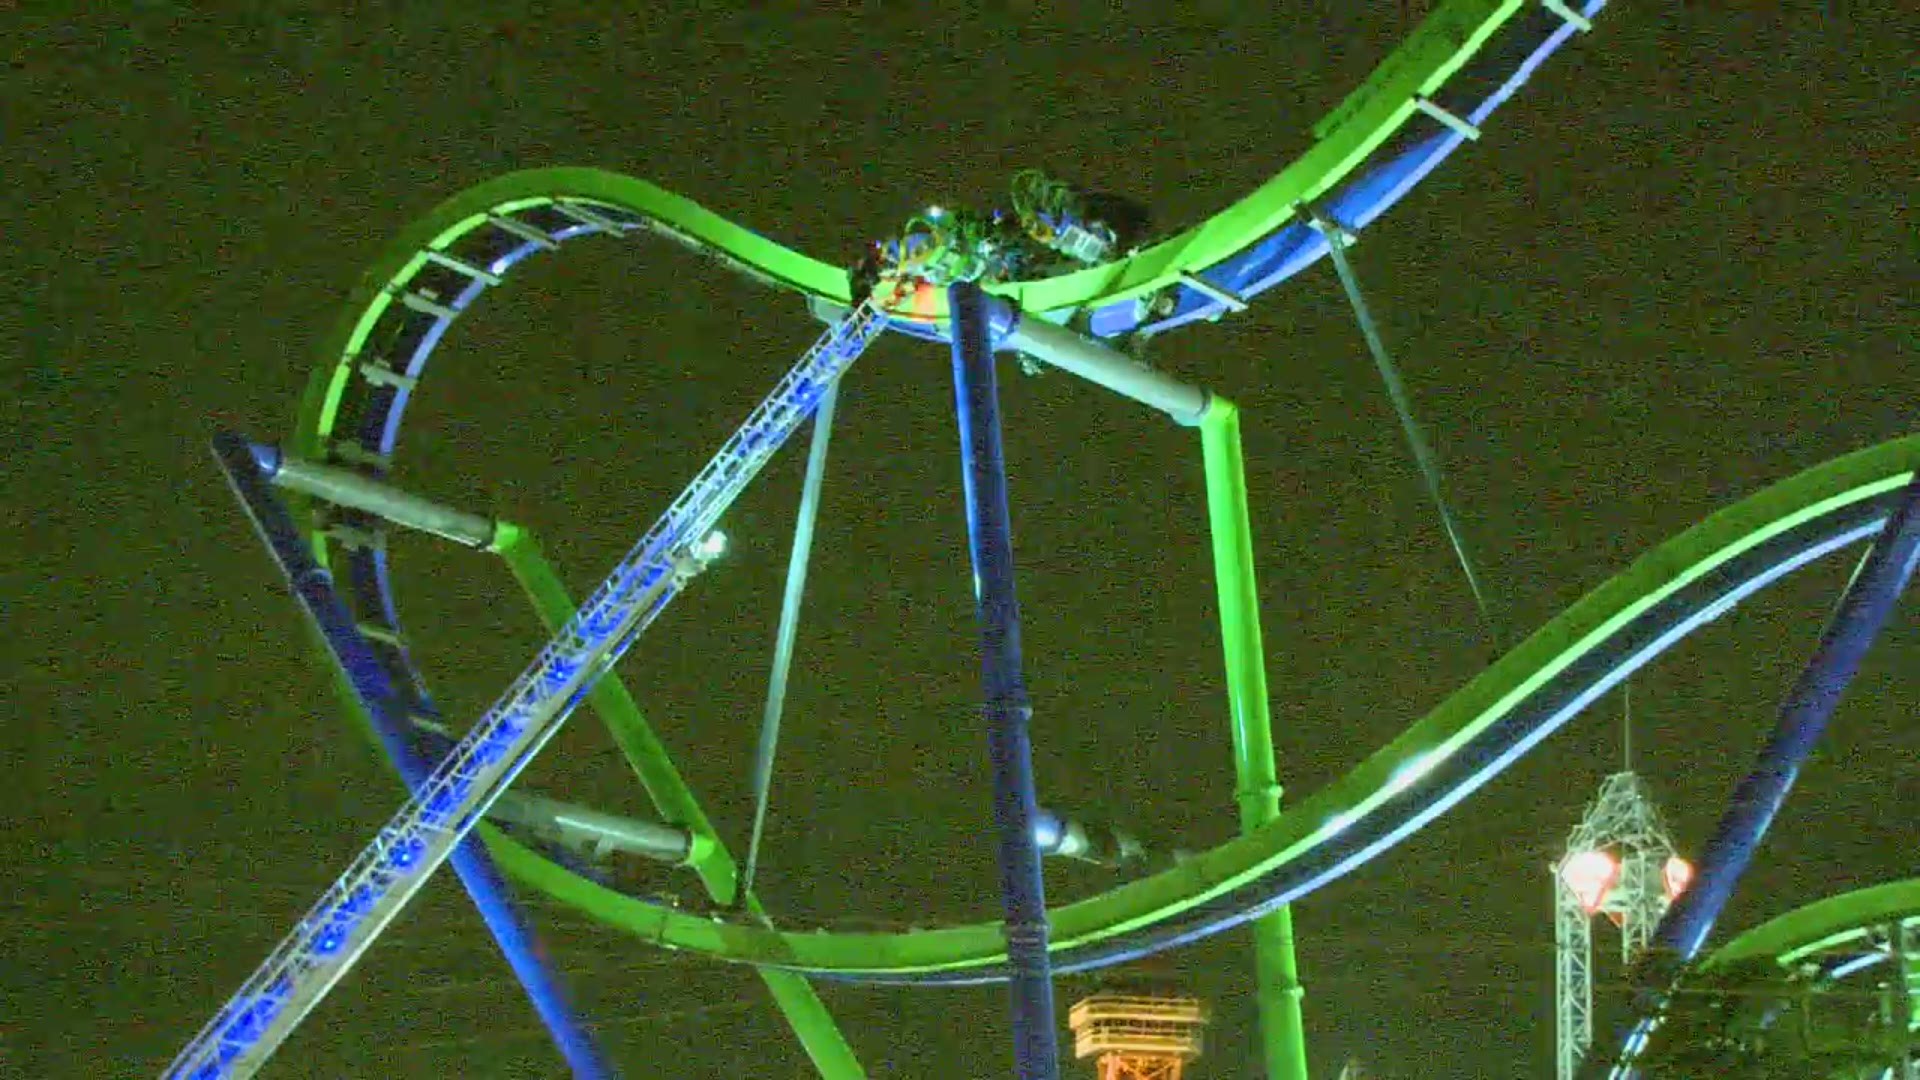 RAW VIDEO: Students stuck on Six Flags Over Texas ride